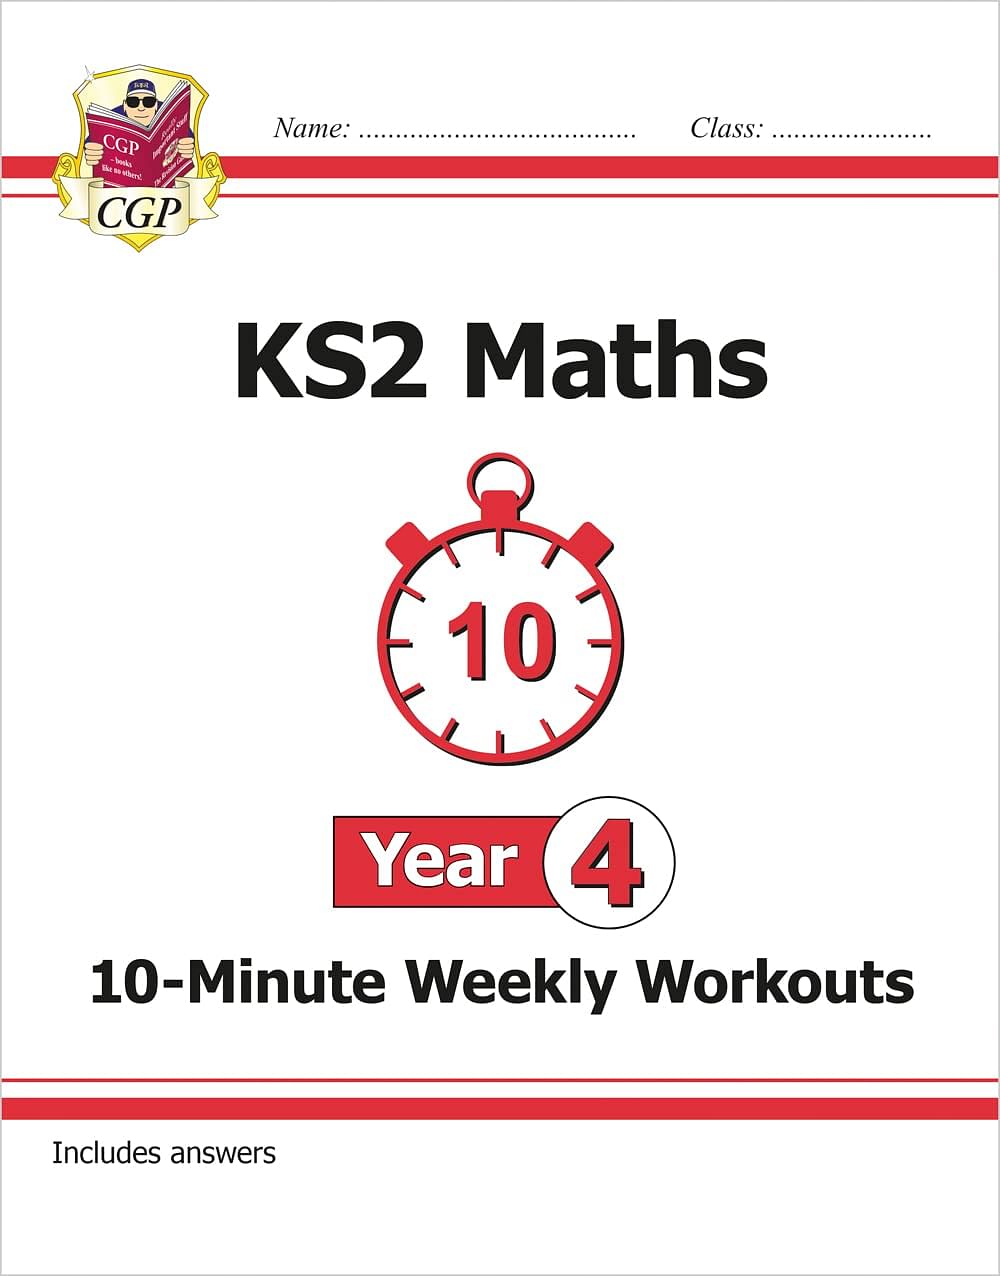 KS2 Maths 10-Minute Weekly Workouts - Year 4 Paperback – Big Book, 17 May 2017 by CGP Books (Author, Editor)